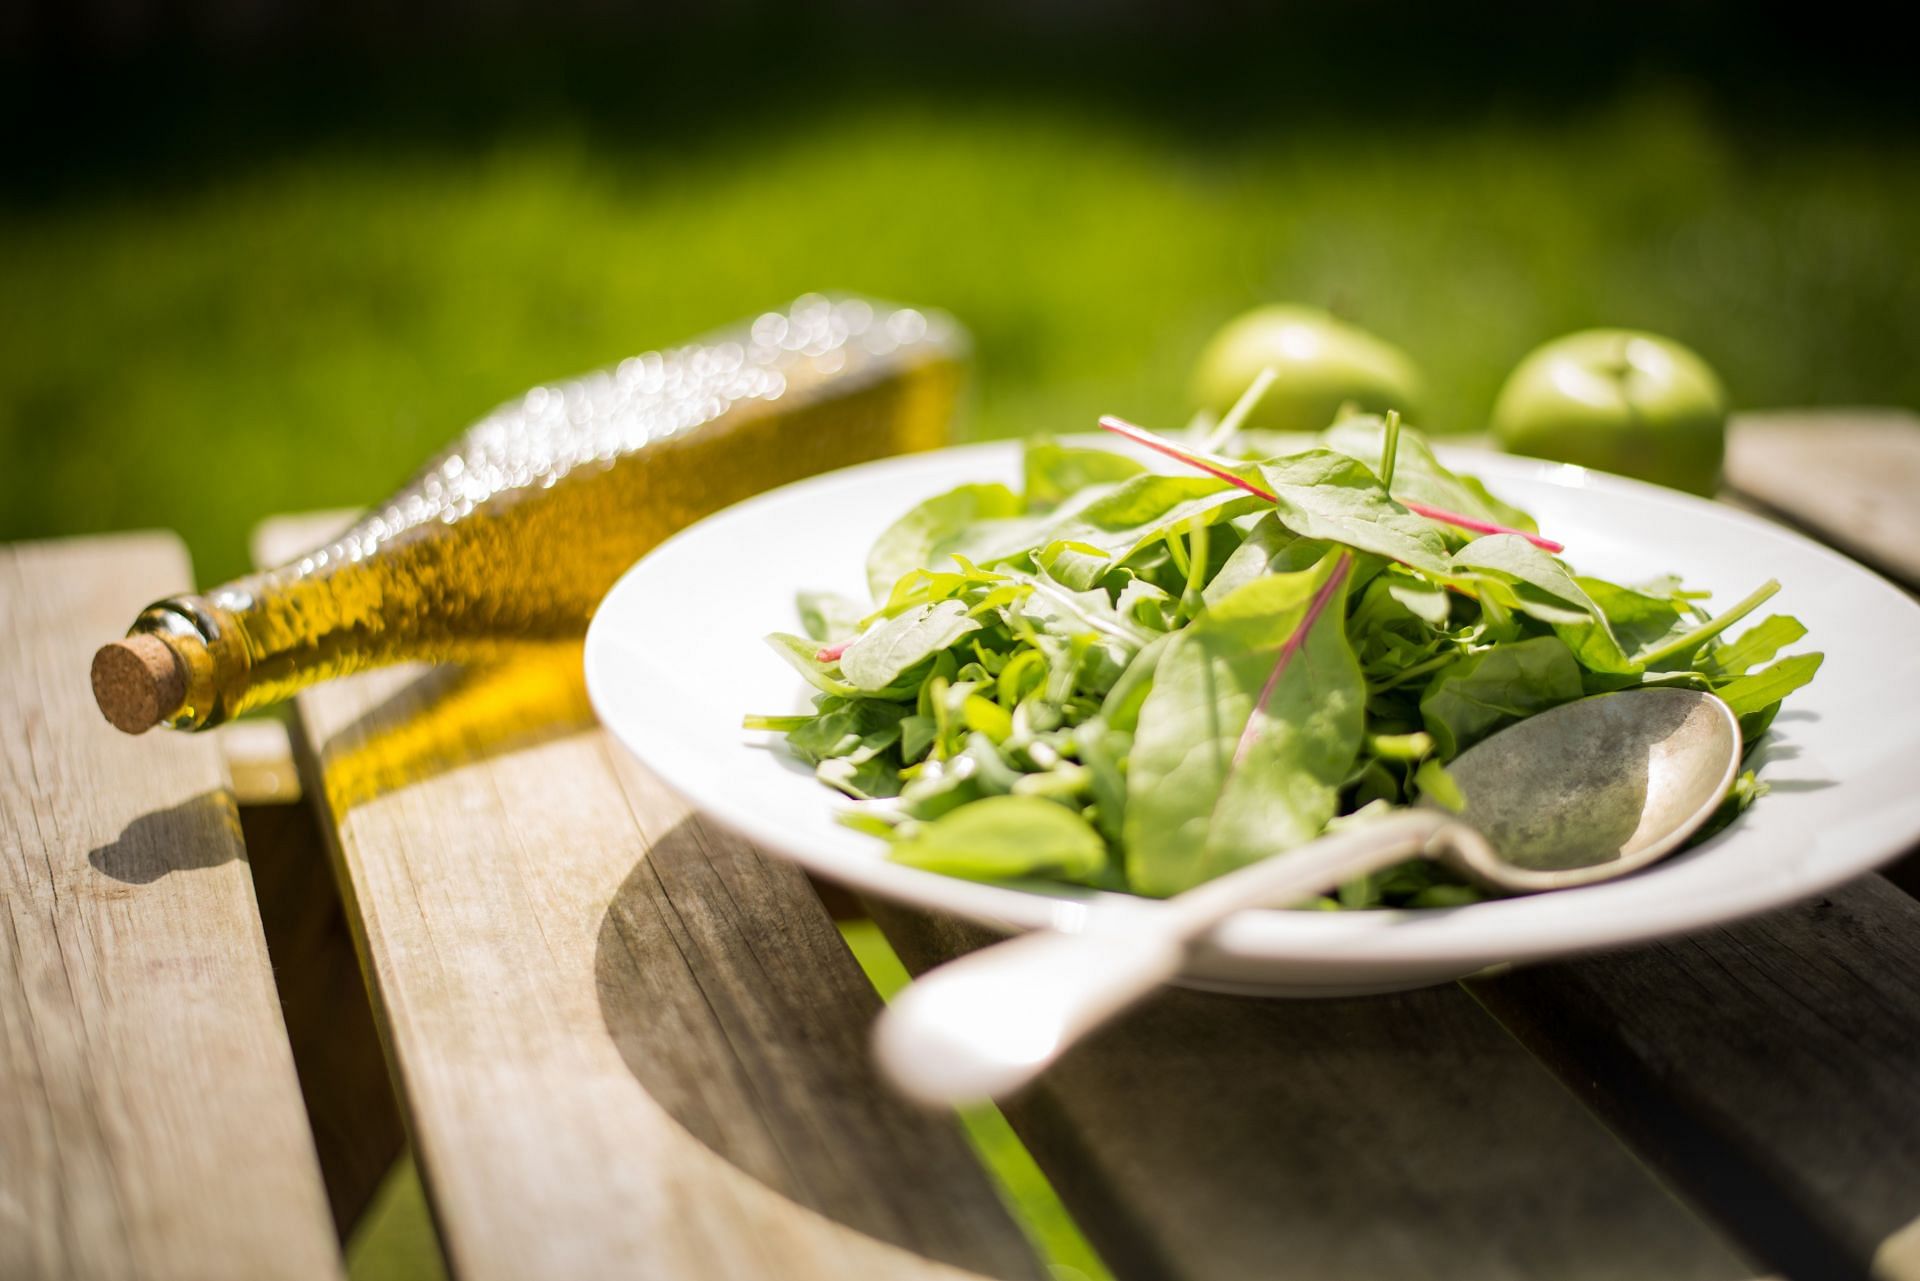 Olive oil can help reduce risk of osteoporosis. (Image via Unsplash/Mike Kenneally)